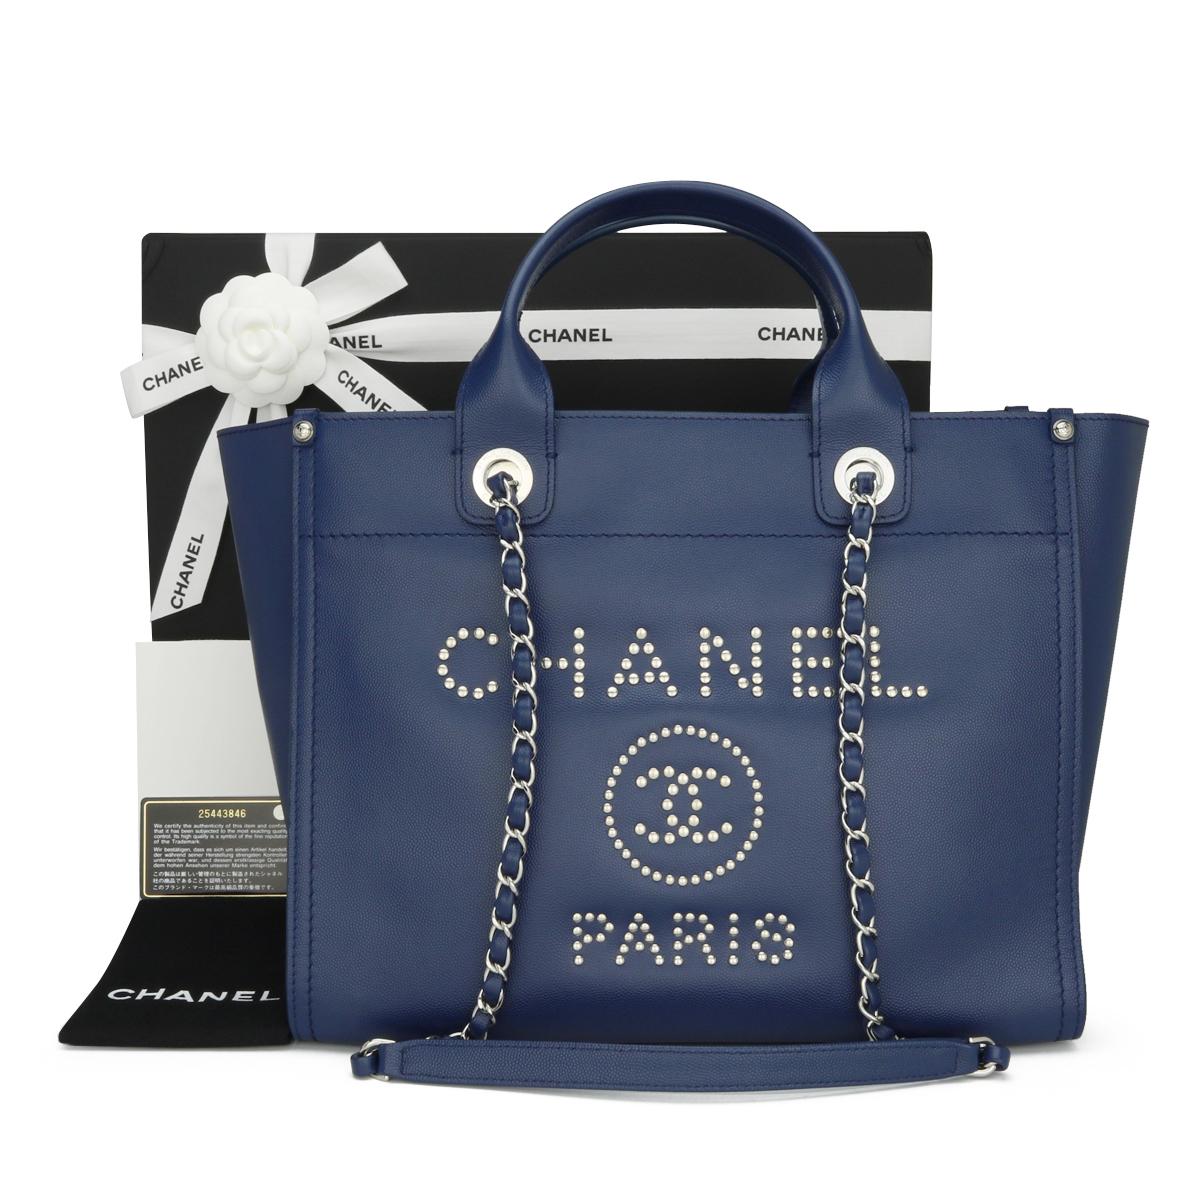 CHANEL Deauville Tote Small Navy Blue Caviar Studded with Silver Hardware 2018 – 18P.

This stunning bag is in immaculate condition. It still keeps its original shape, and the leather smells fresh, as if new.

One of the most sought after Chanel